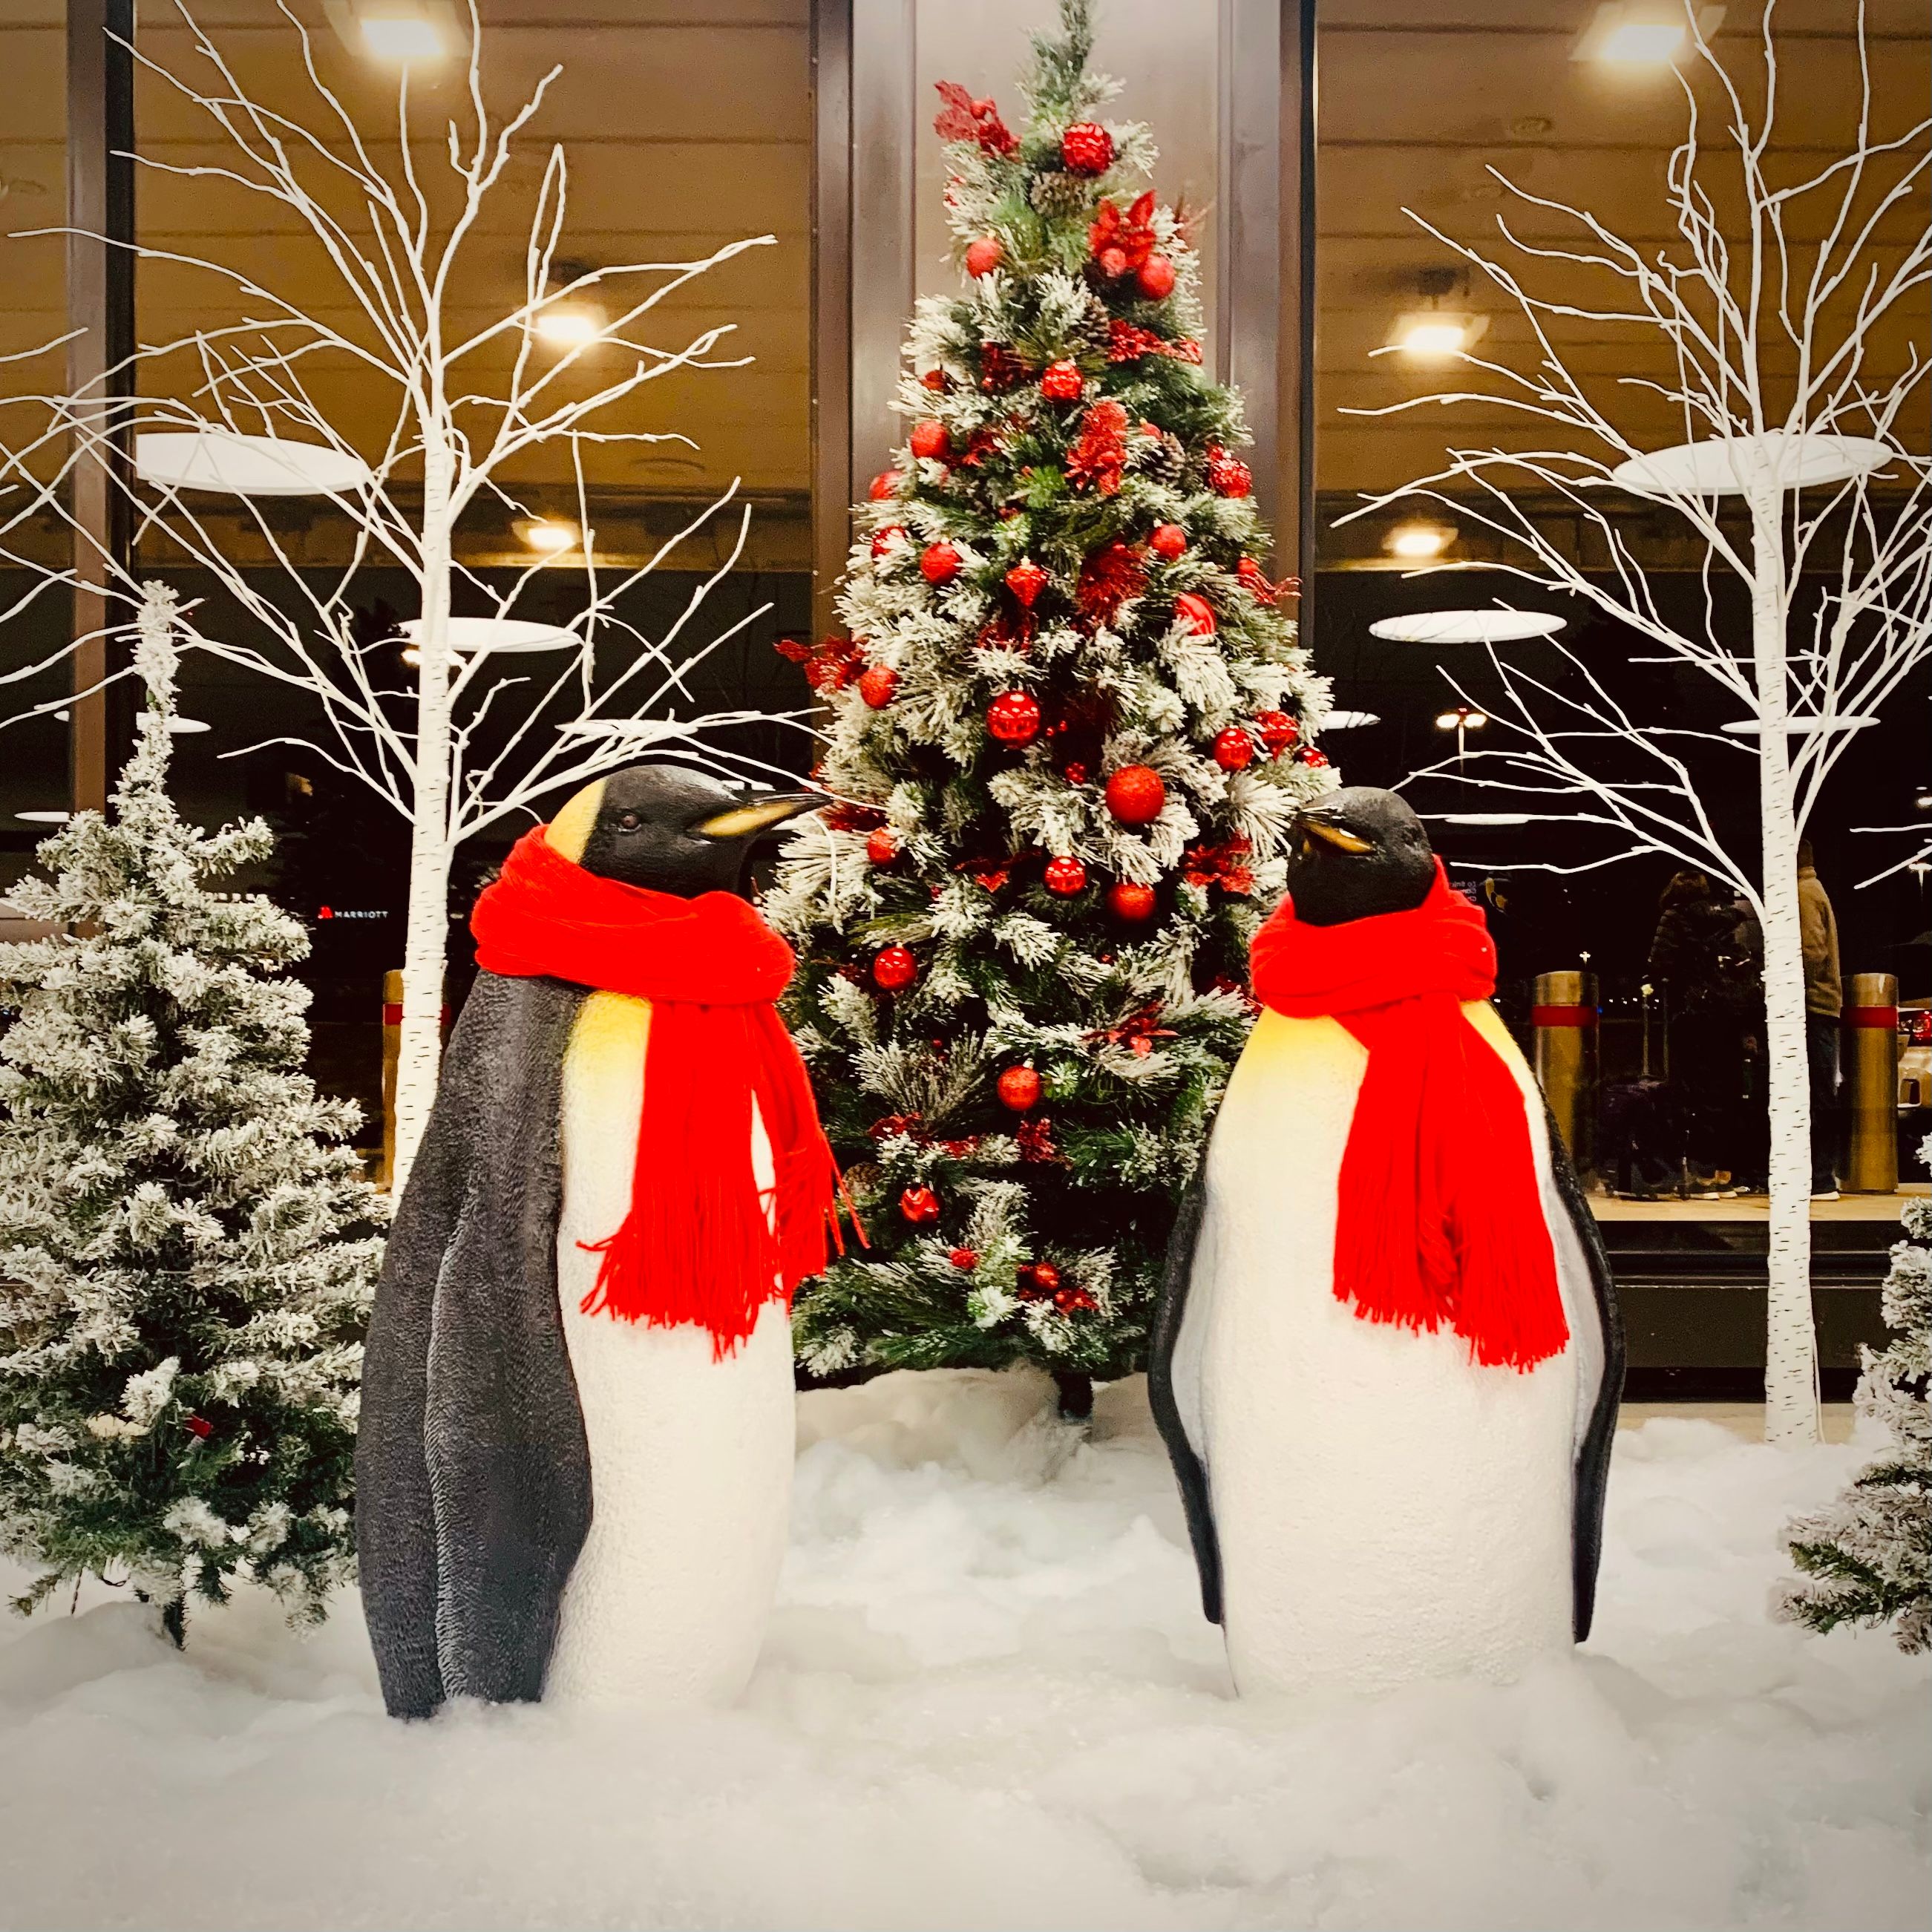 A winter display of penguins and artificial Christmas trees